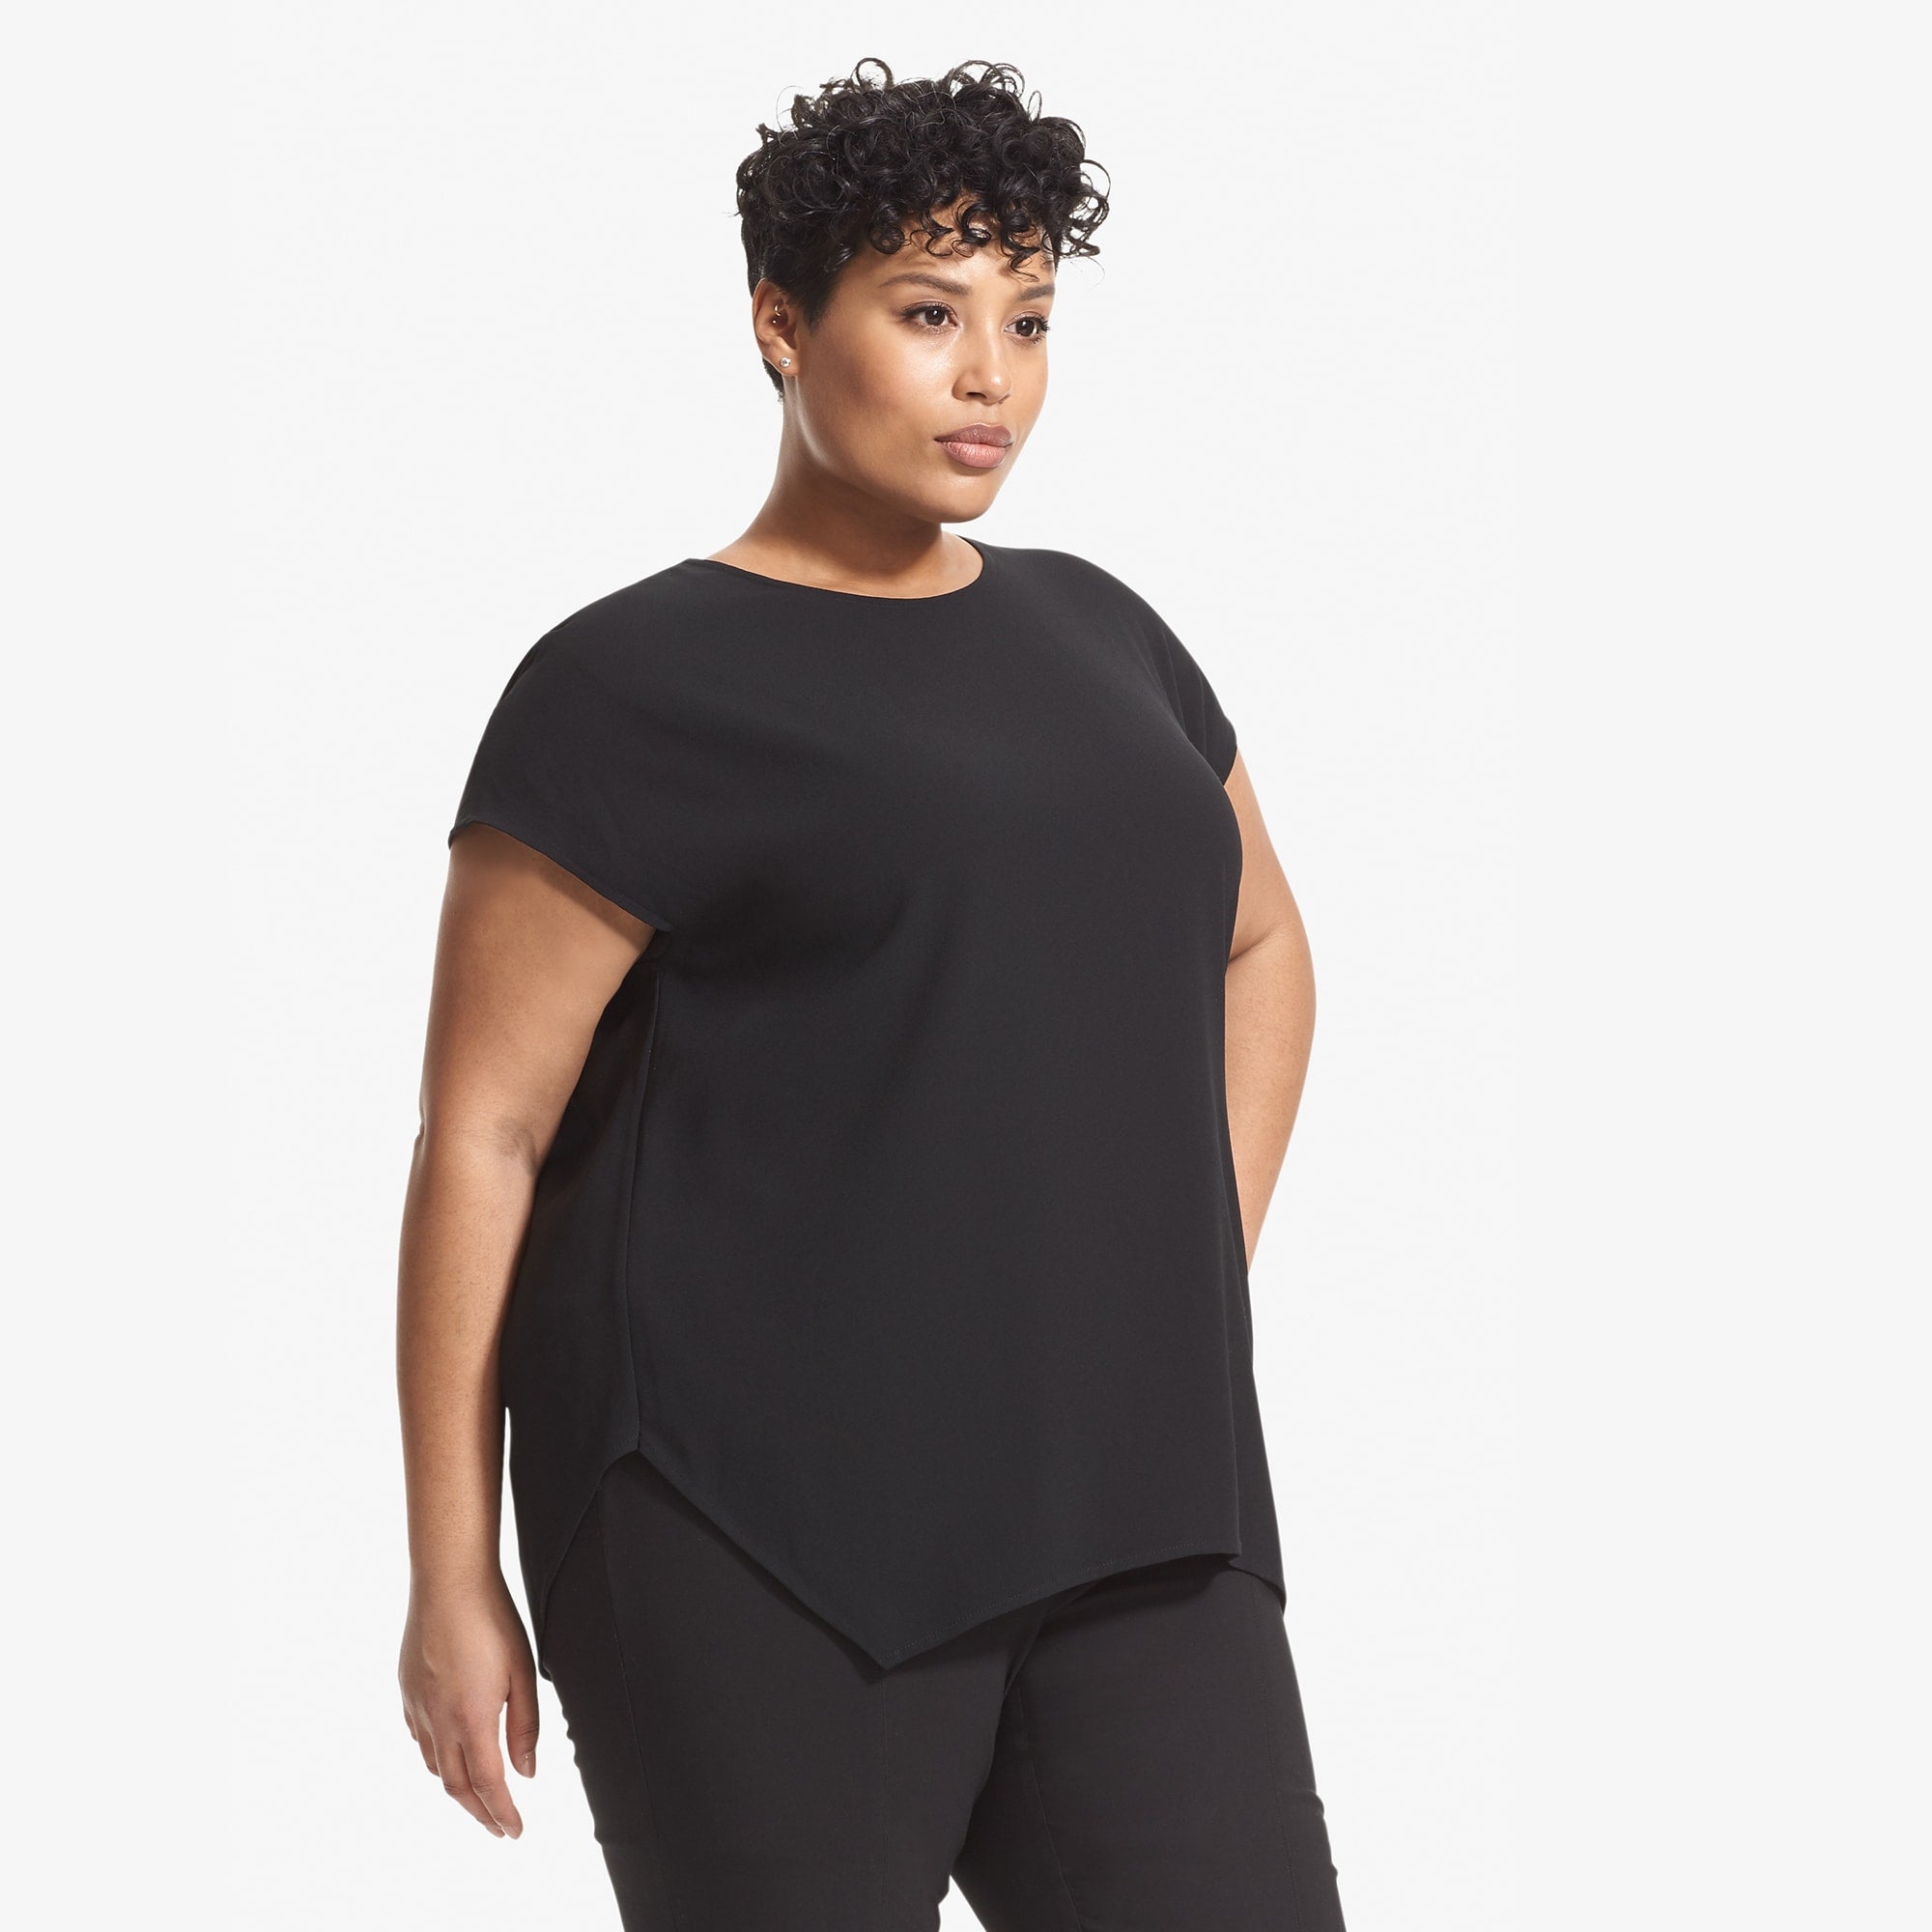 Side image of a woman standing wearing the Didion top in black